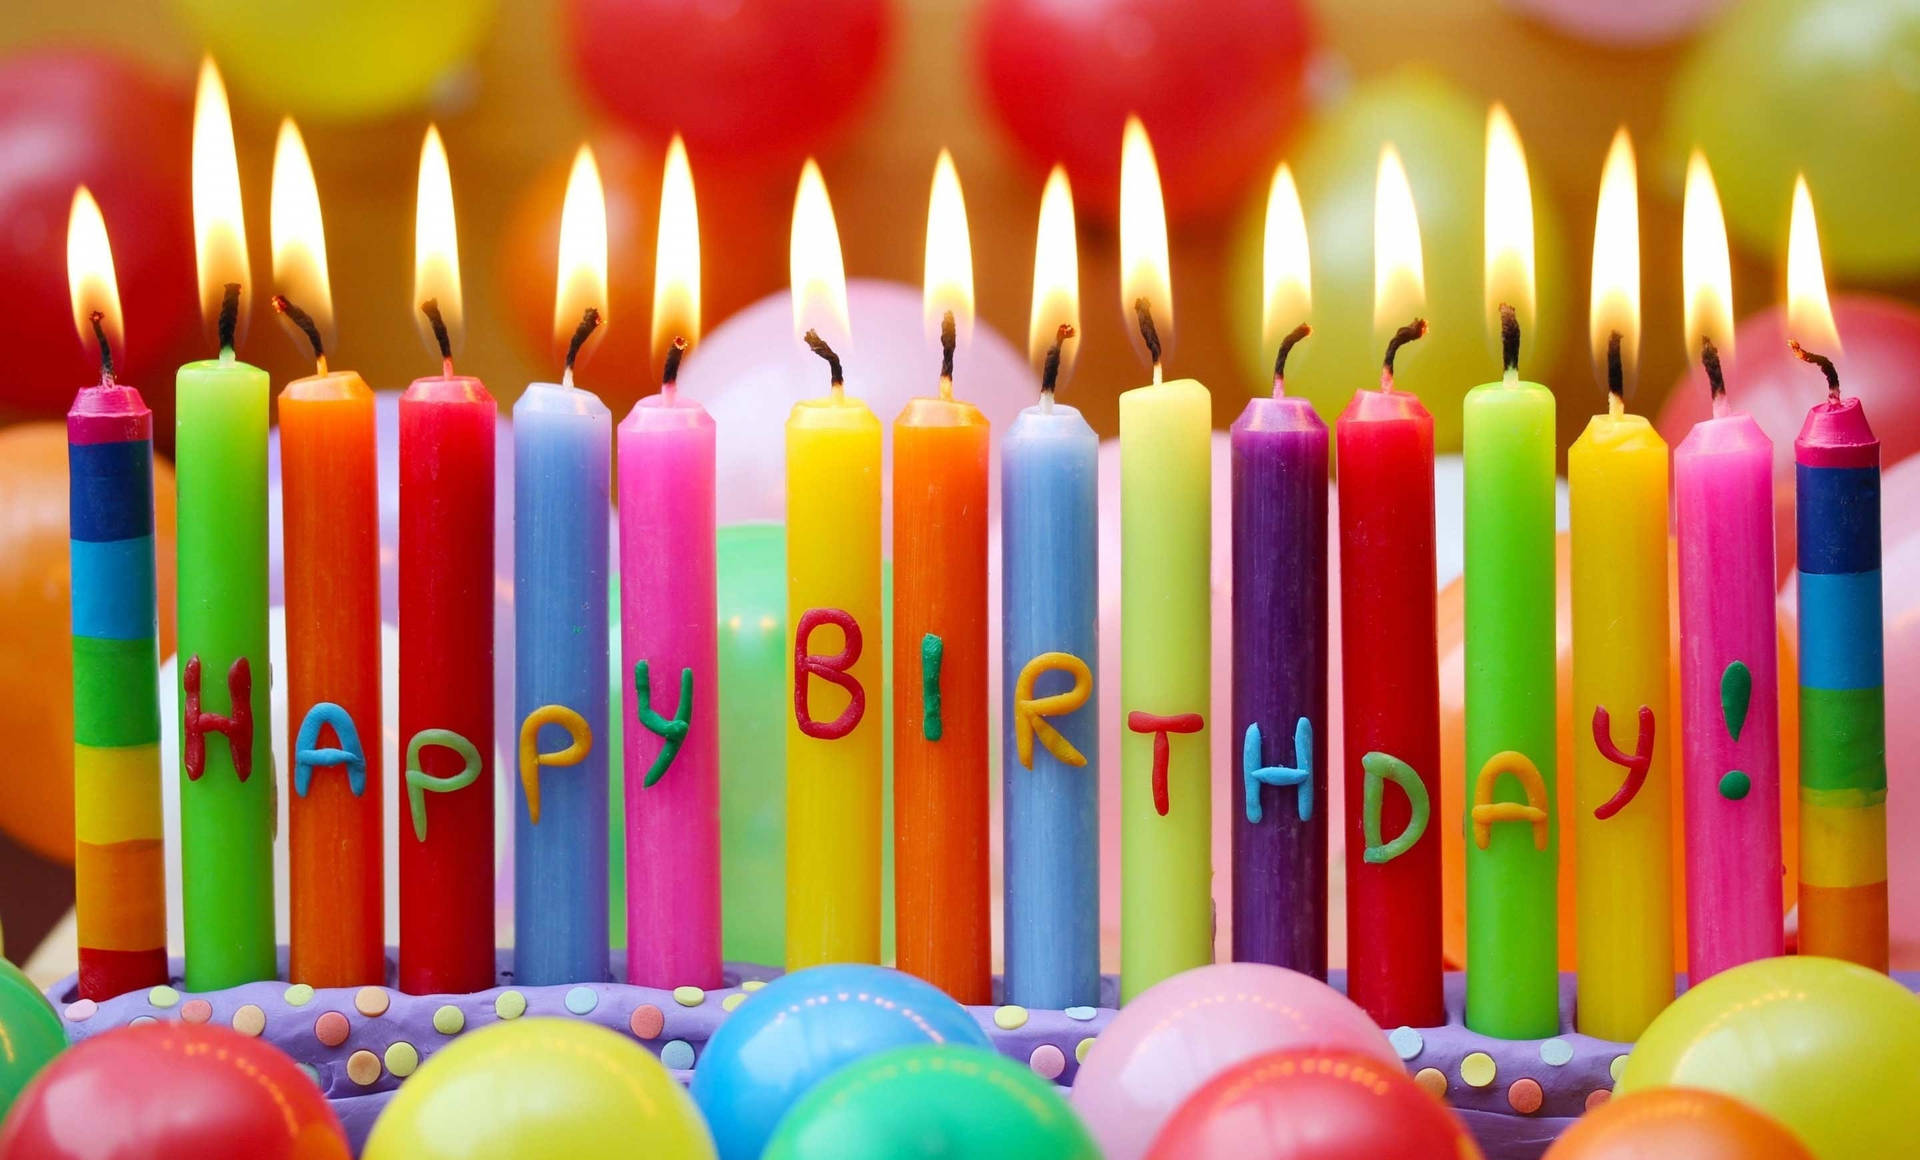 Long Colorful Birthday Cake Candles Wallpaper